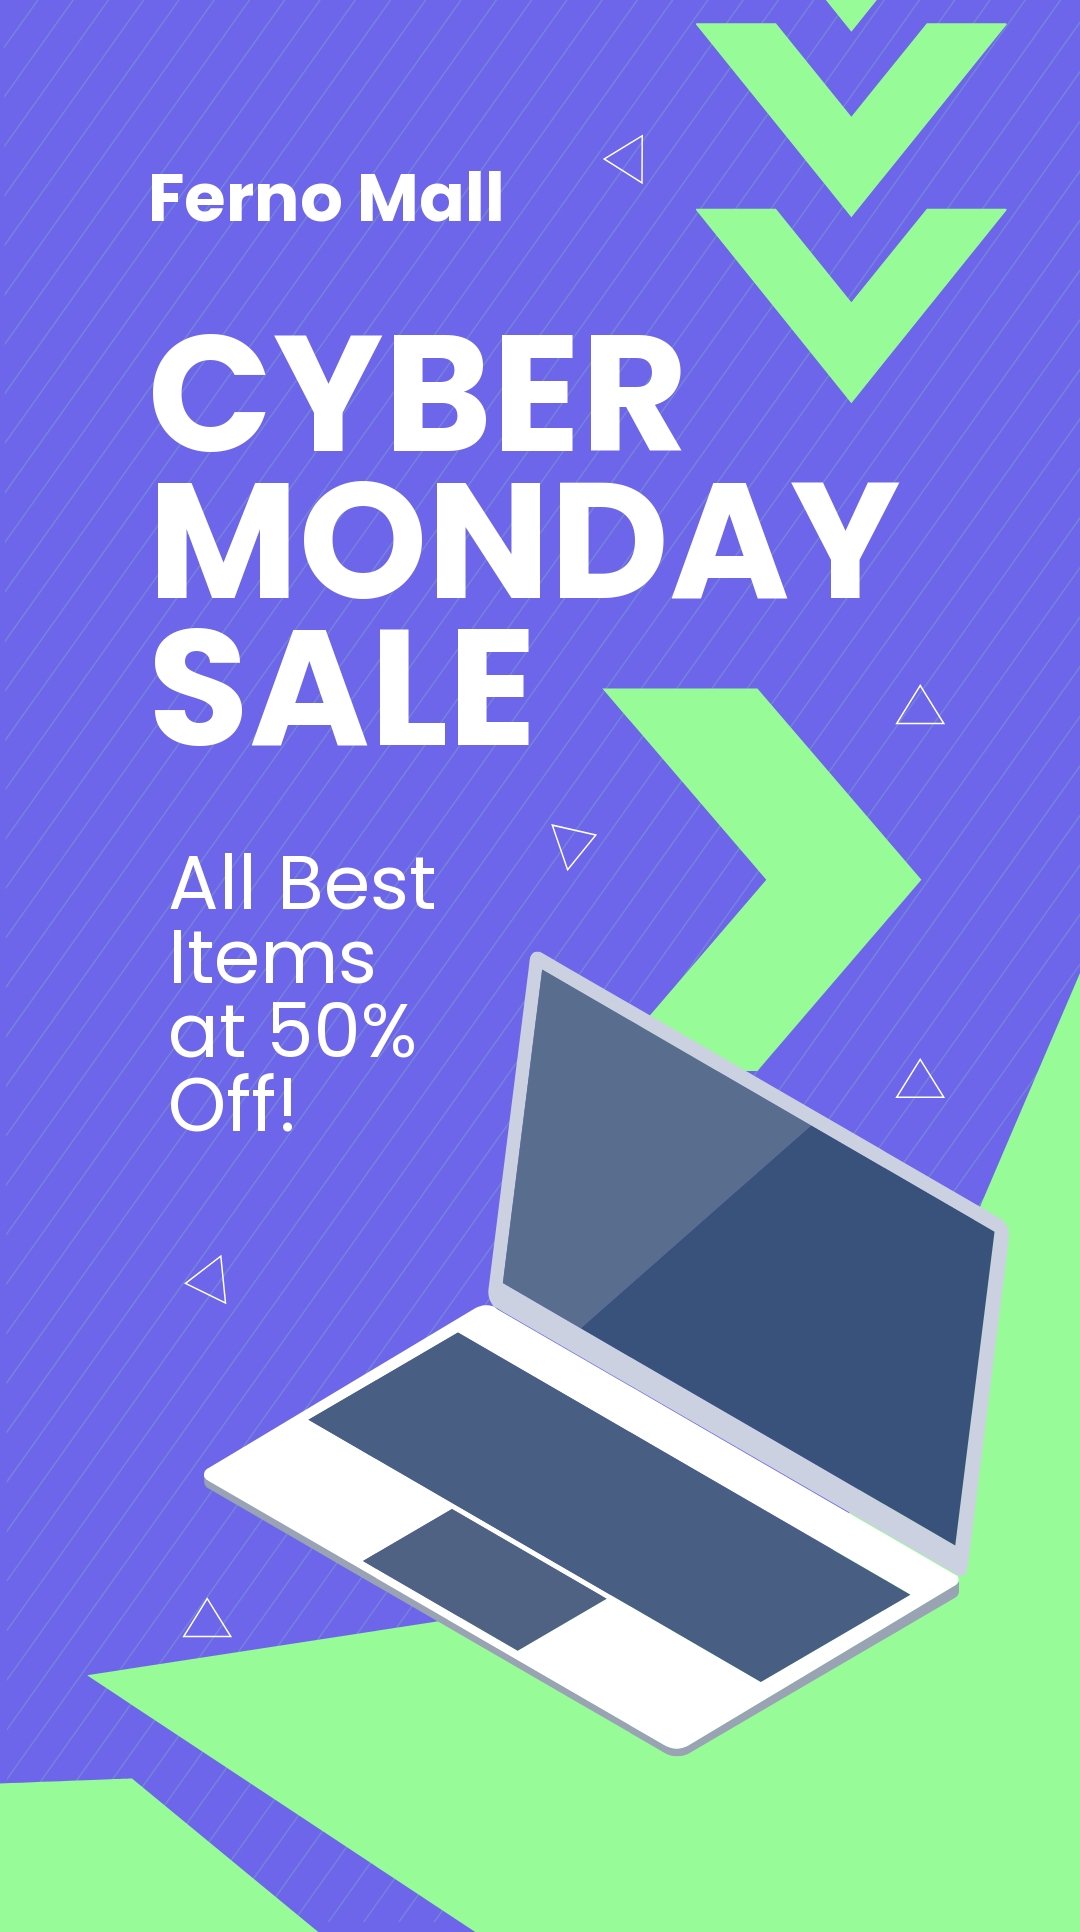 Cyber Monday Sales Event Instagram Story Template